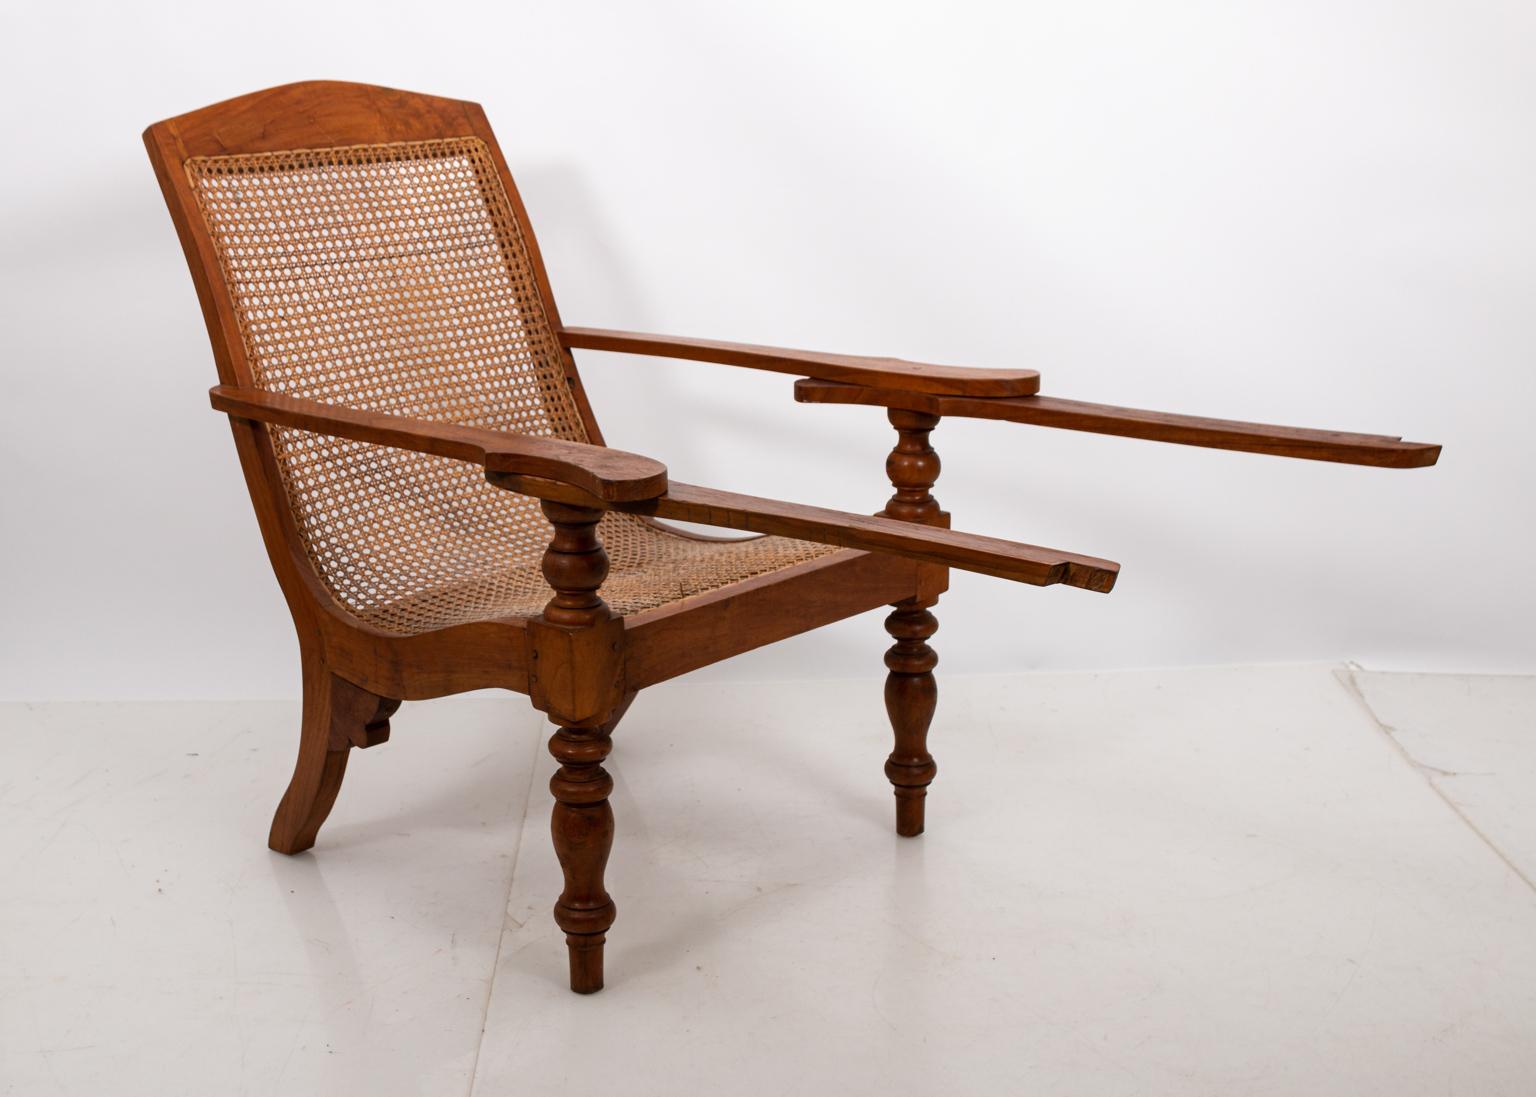 20th Century Anglo-Indian Teakwood and Cane Plantation Chair 